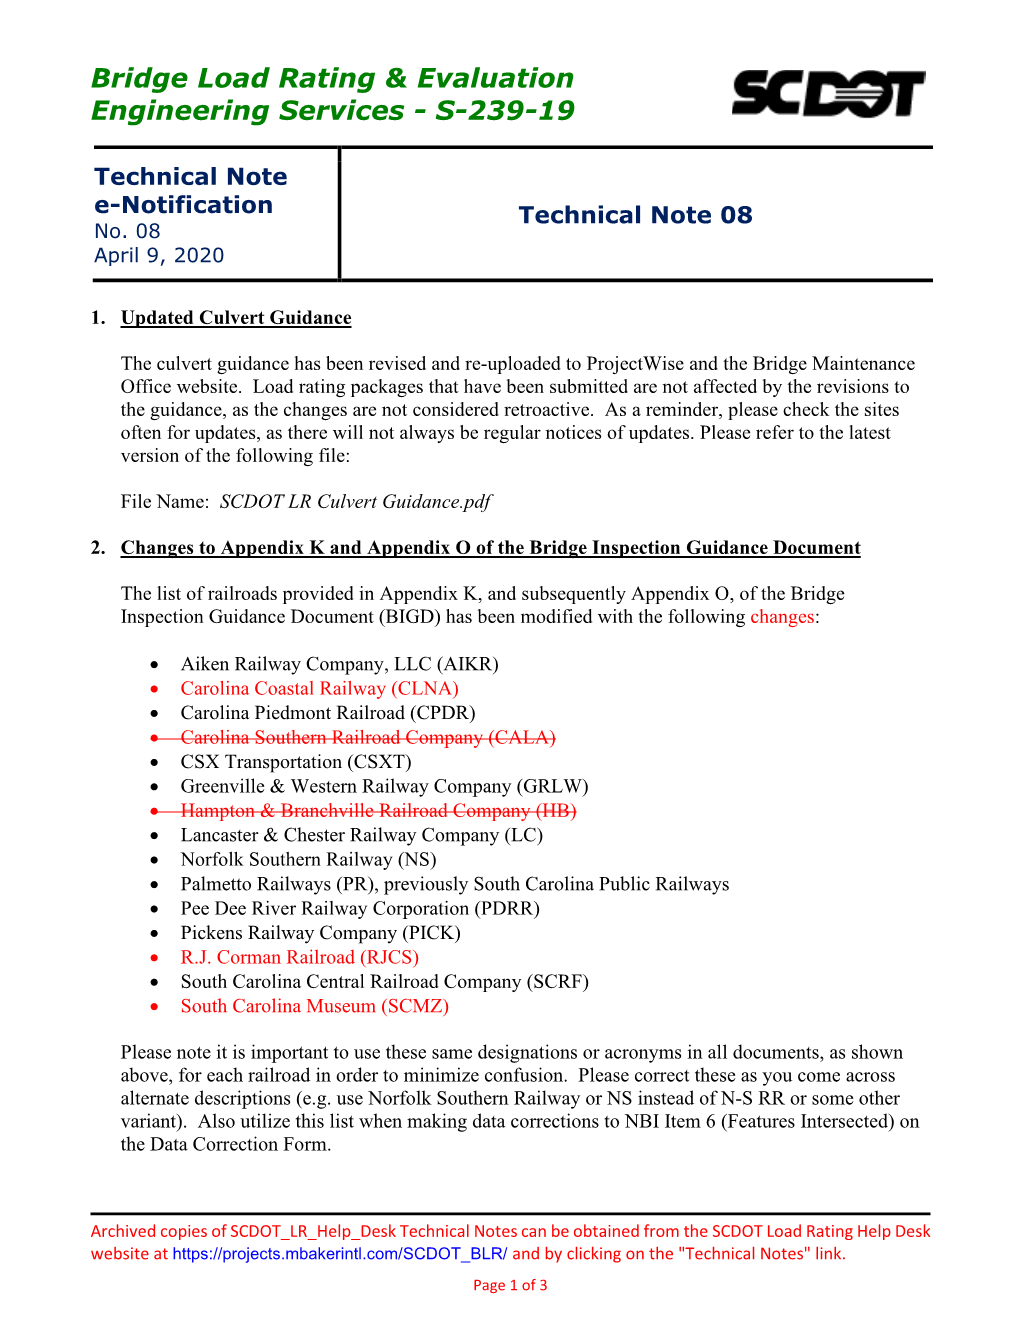 Technical Note 08 No